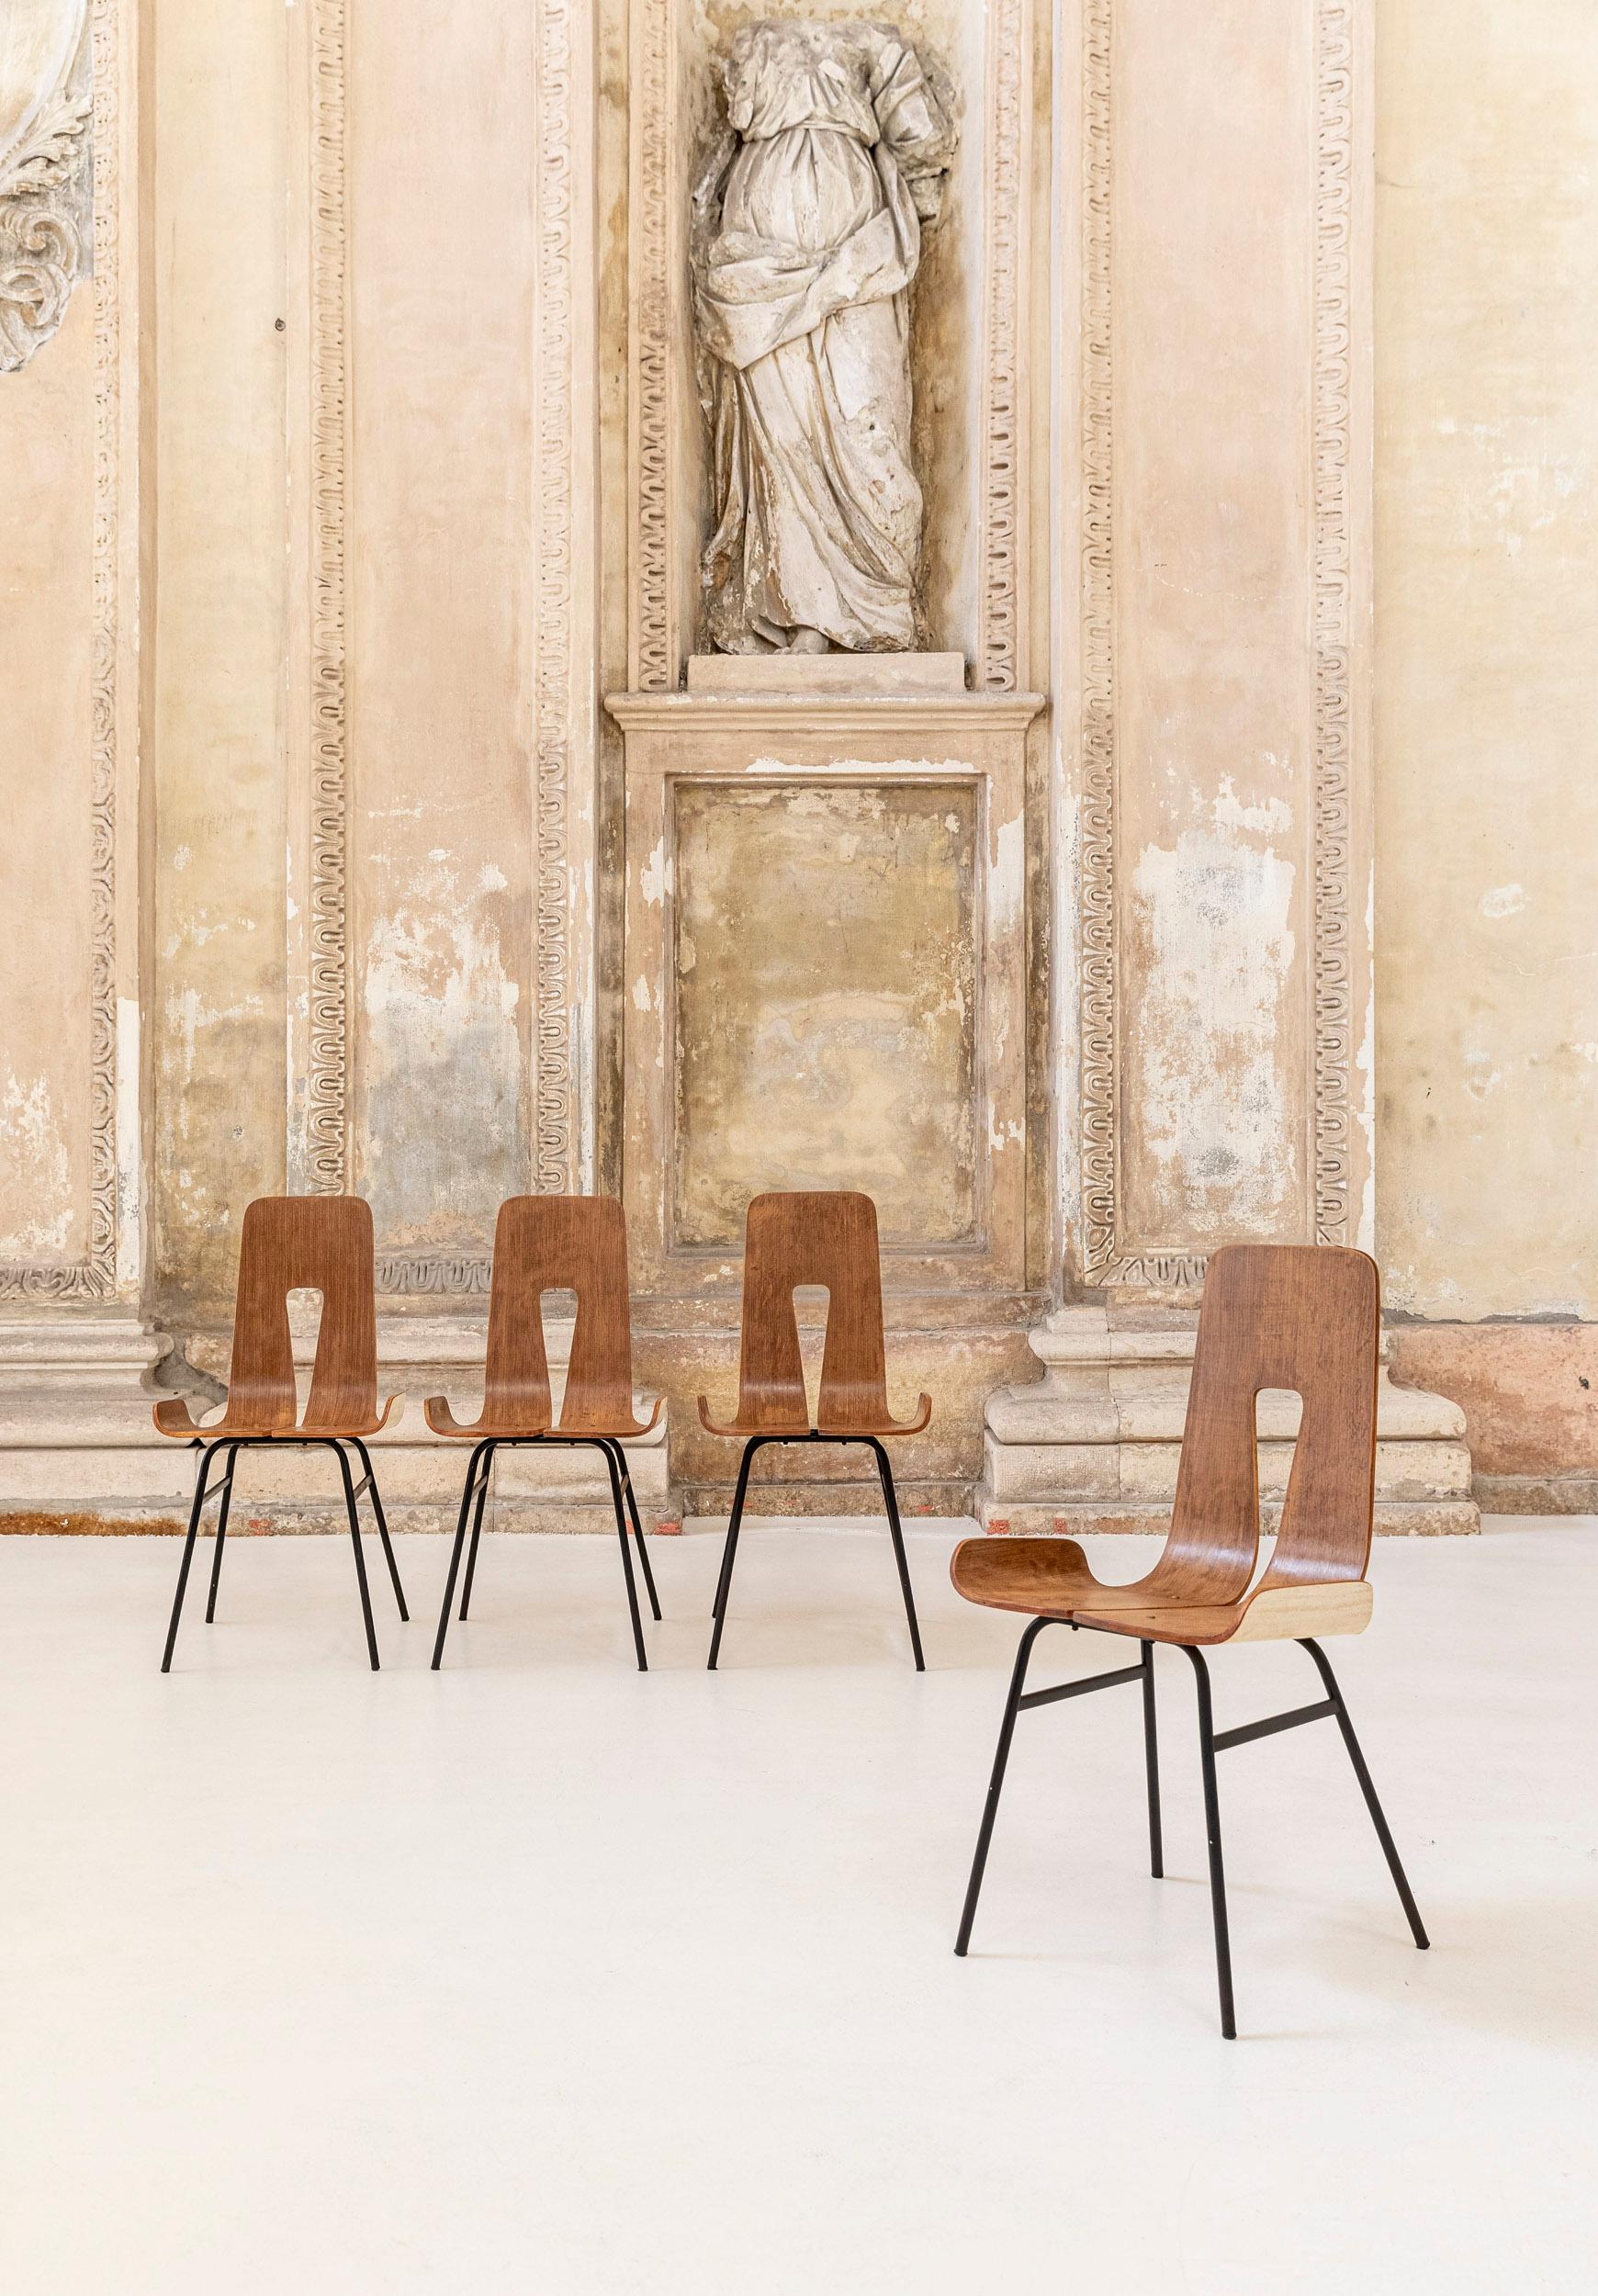 Stunning set of 4 chairs designed by Carlo Ratti.
Very comfortable, shaped seats.